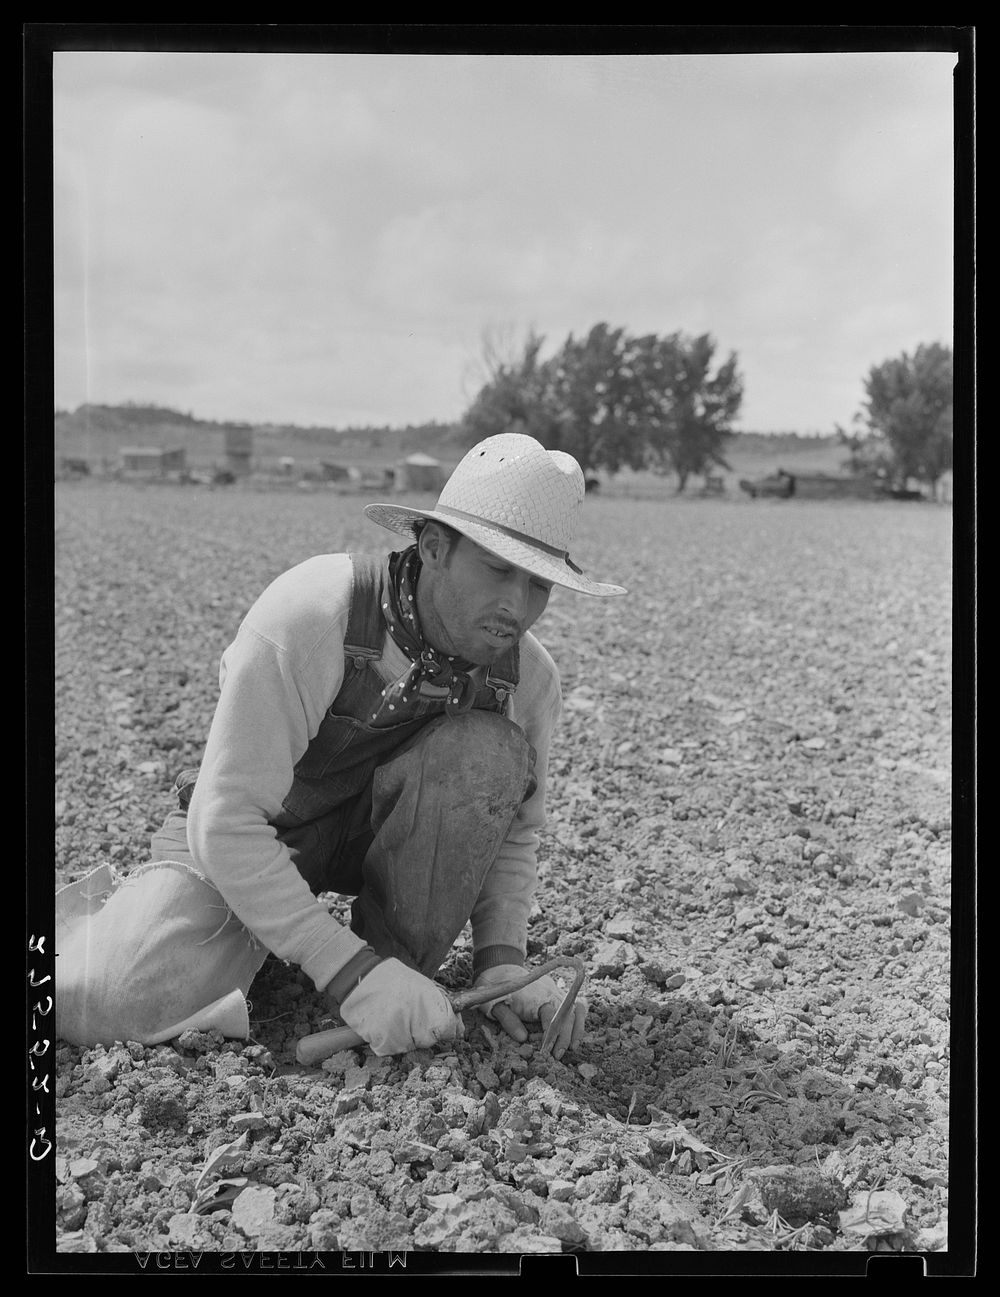 Chopping sugar beets. Treasure County, Montana. Sourced from the Library of Congress.